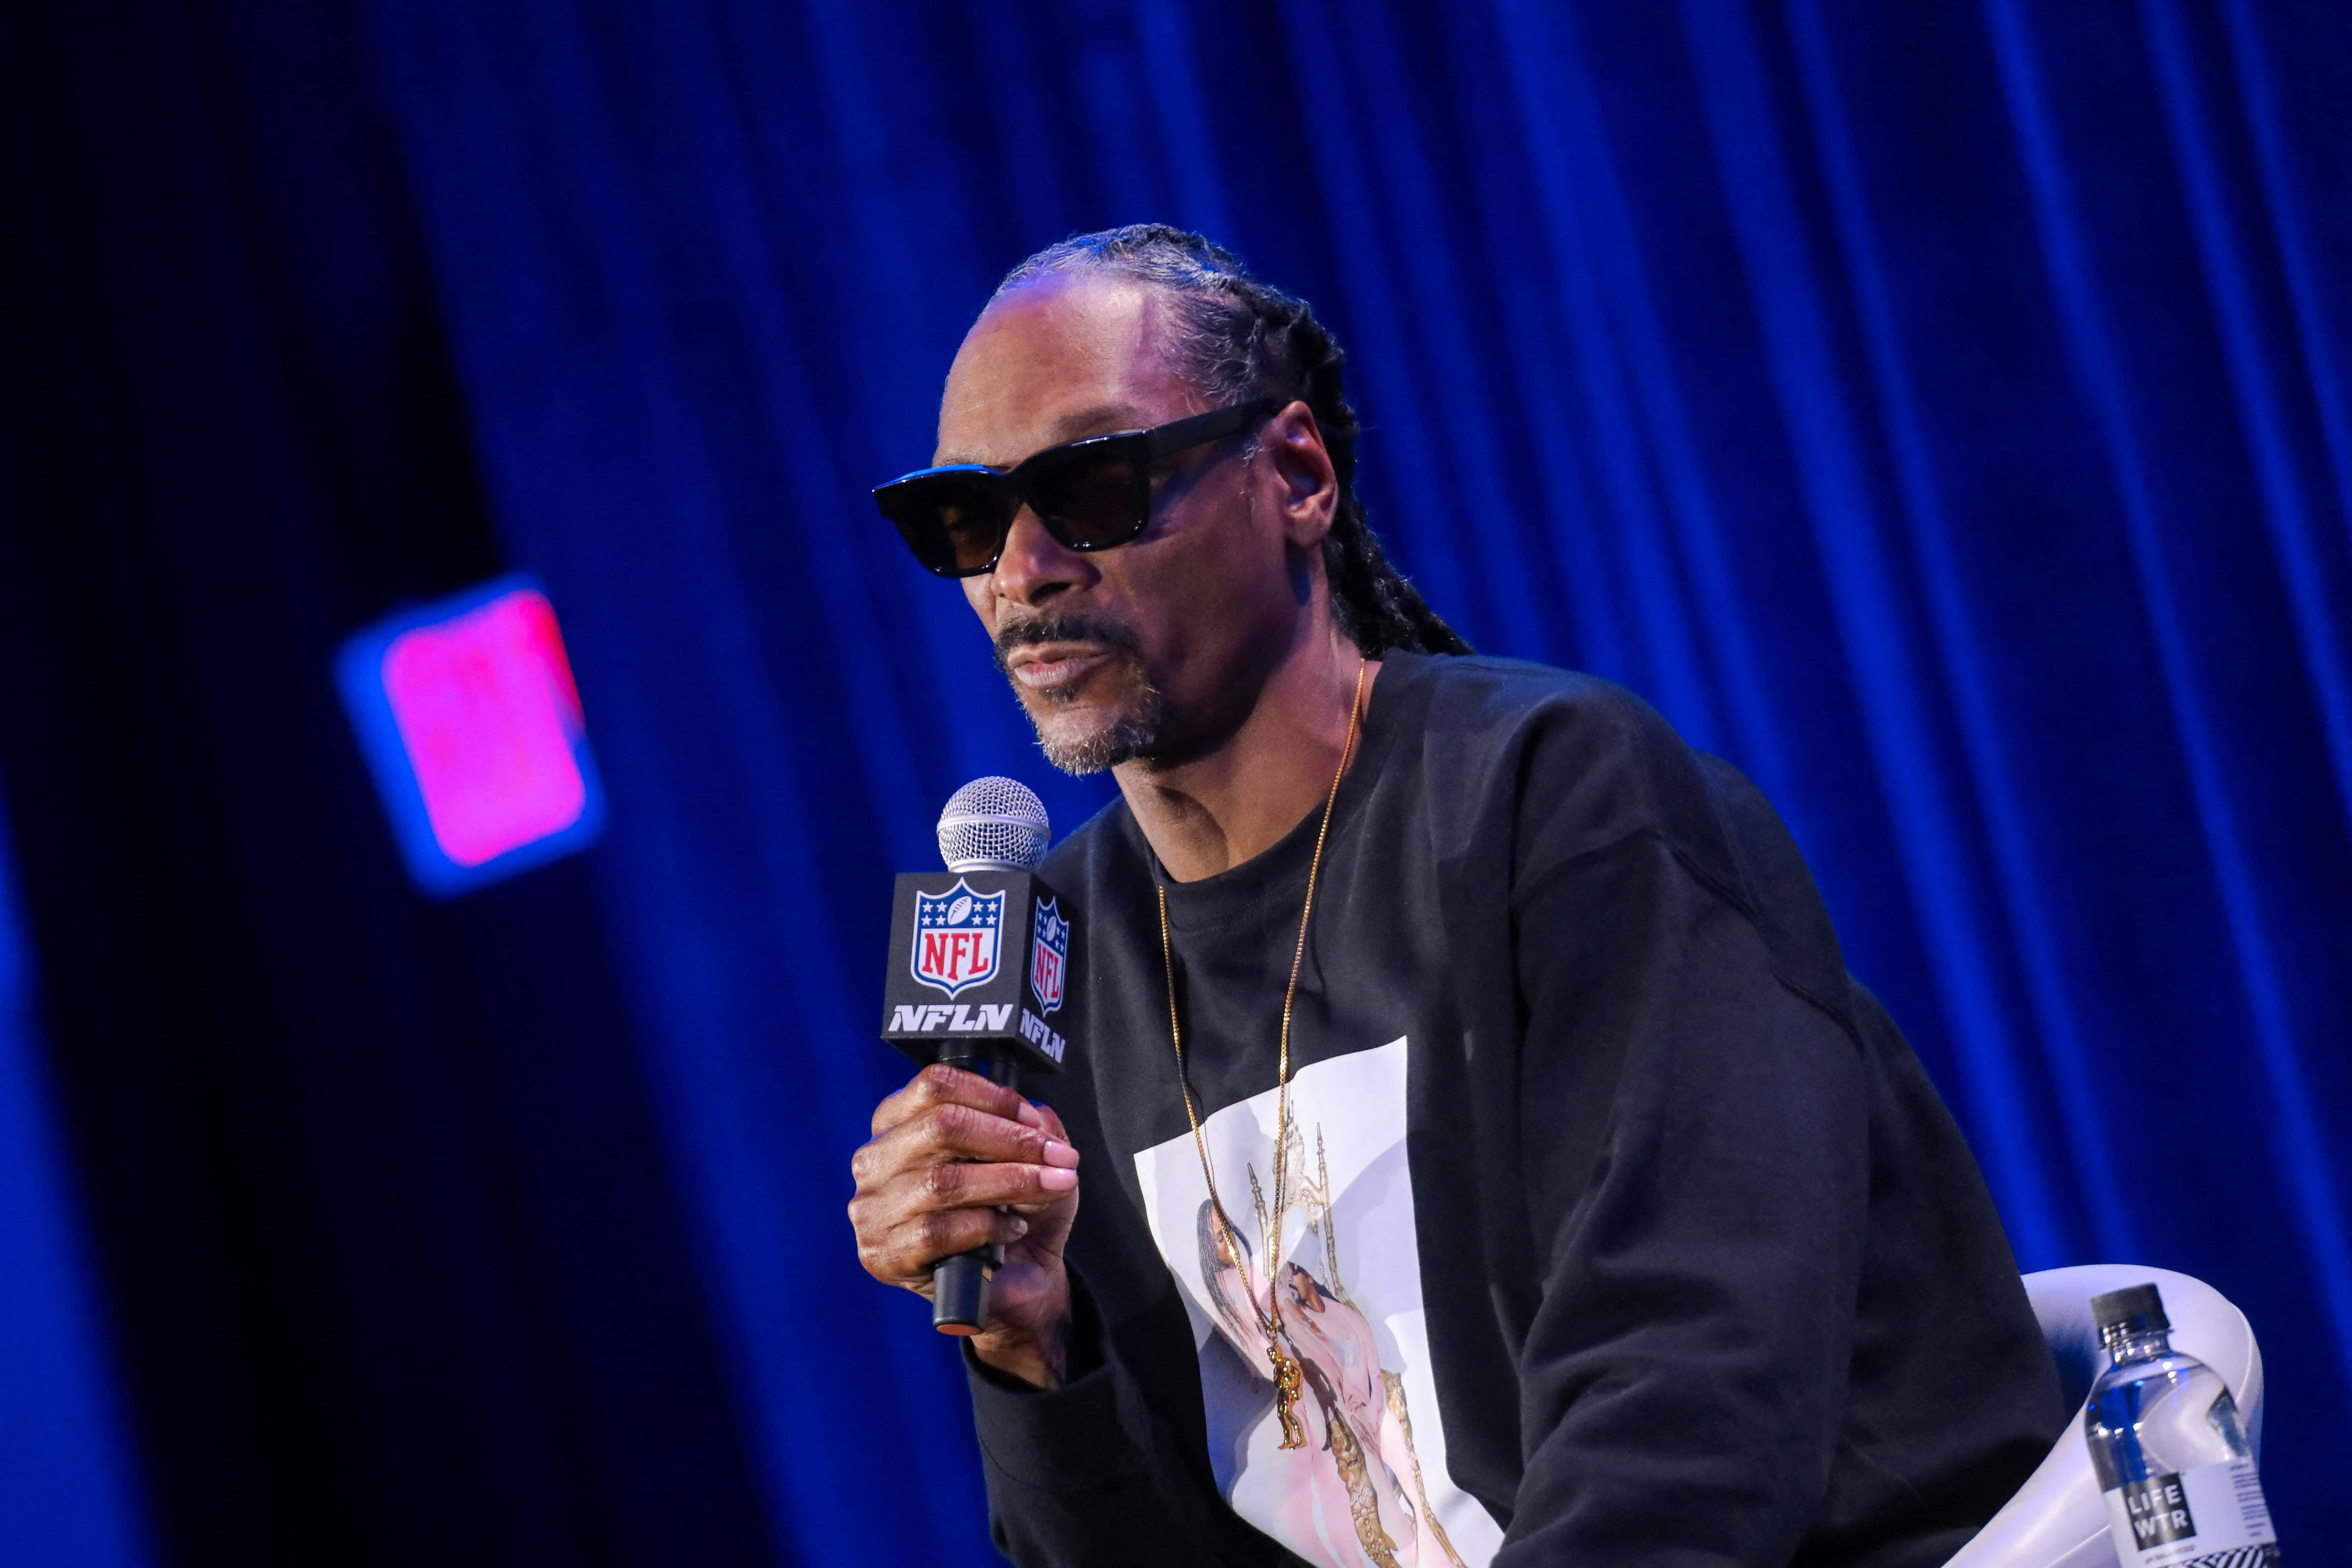 rapper-snoop-dogg-speaks-during-a-news-conference-in-los-angeles